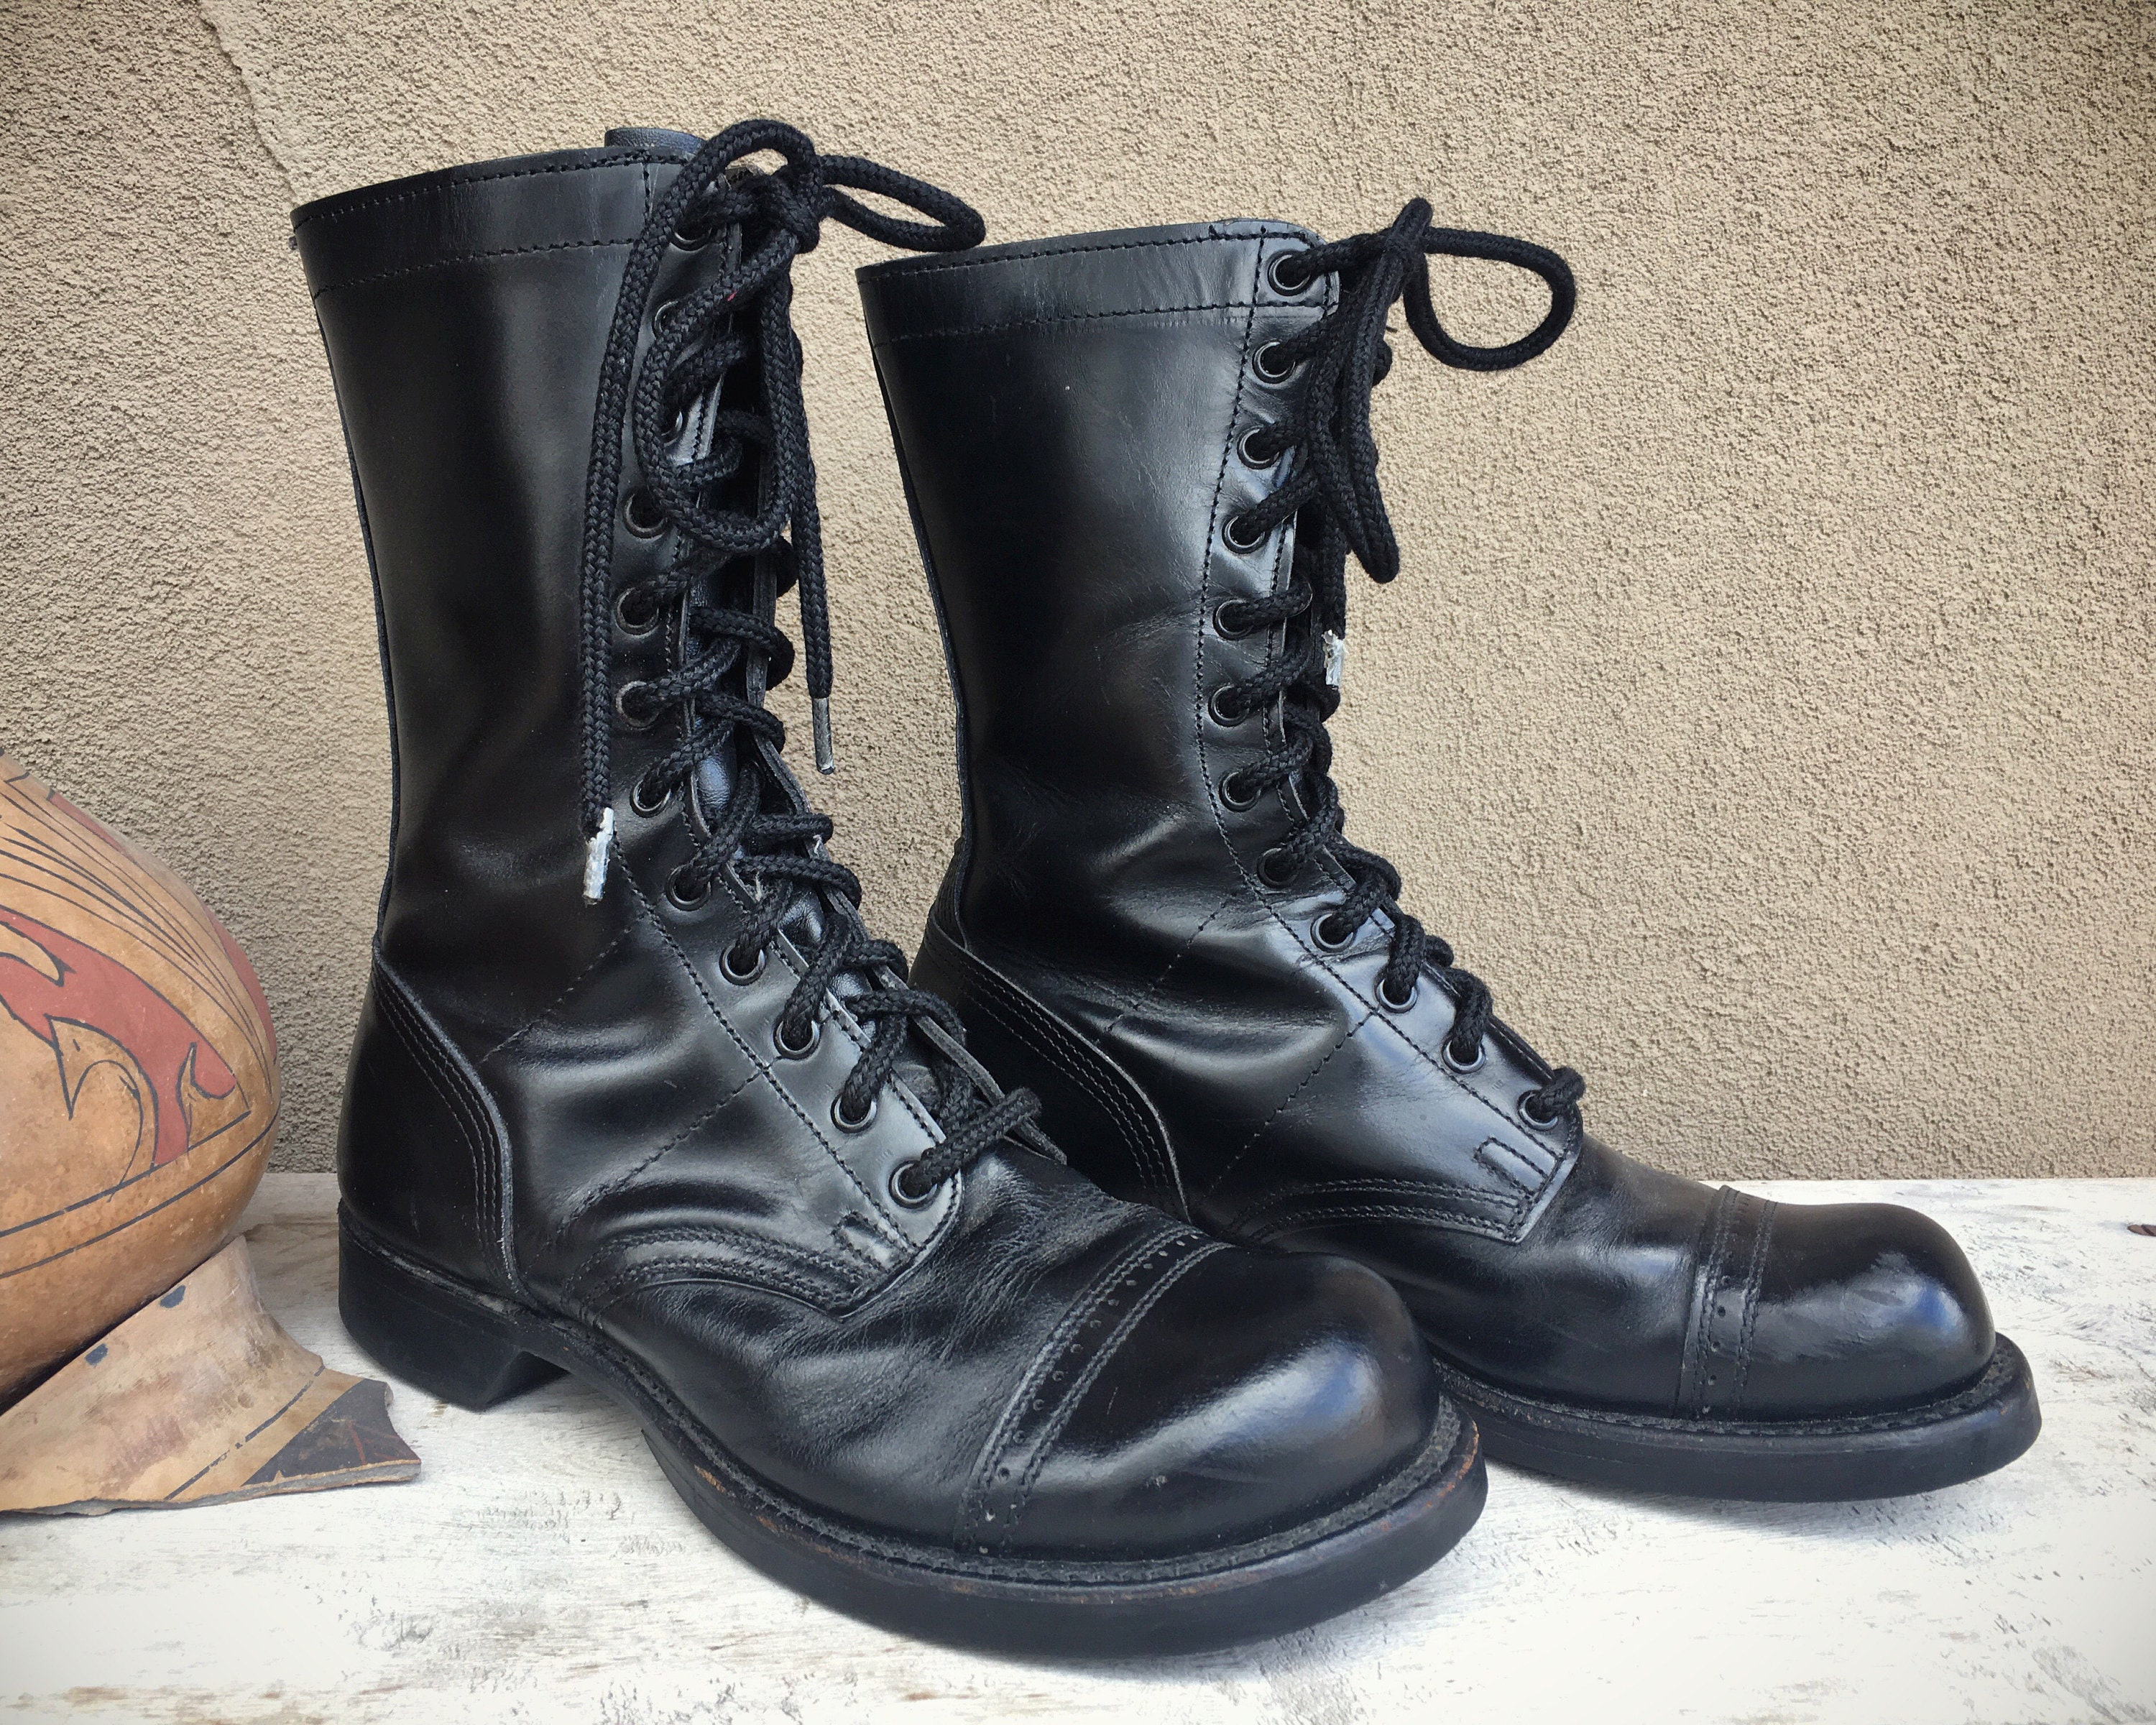 Black Army Jump Boots | vlr.eng.br